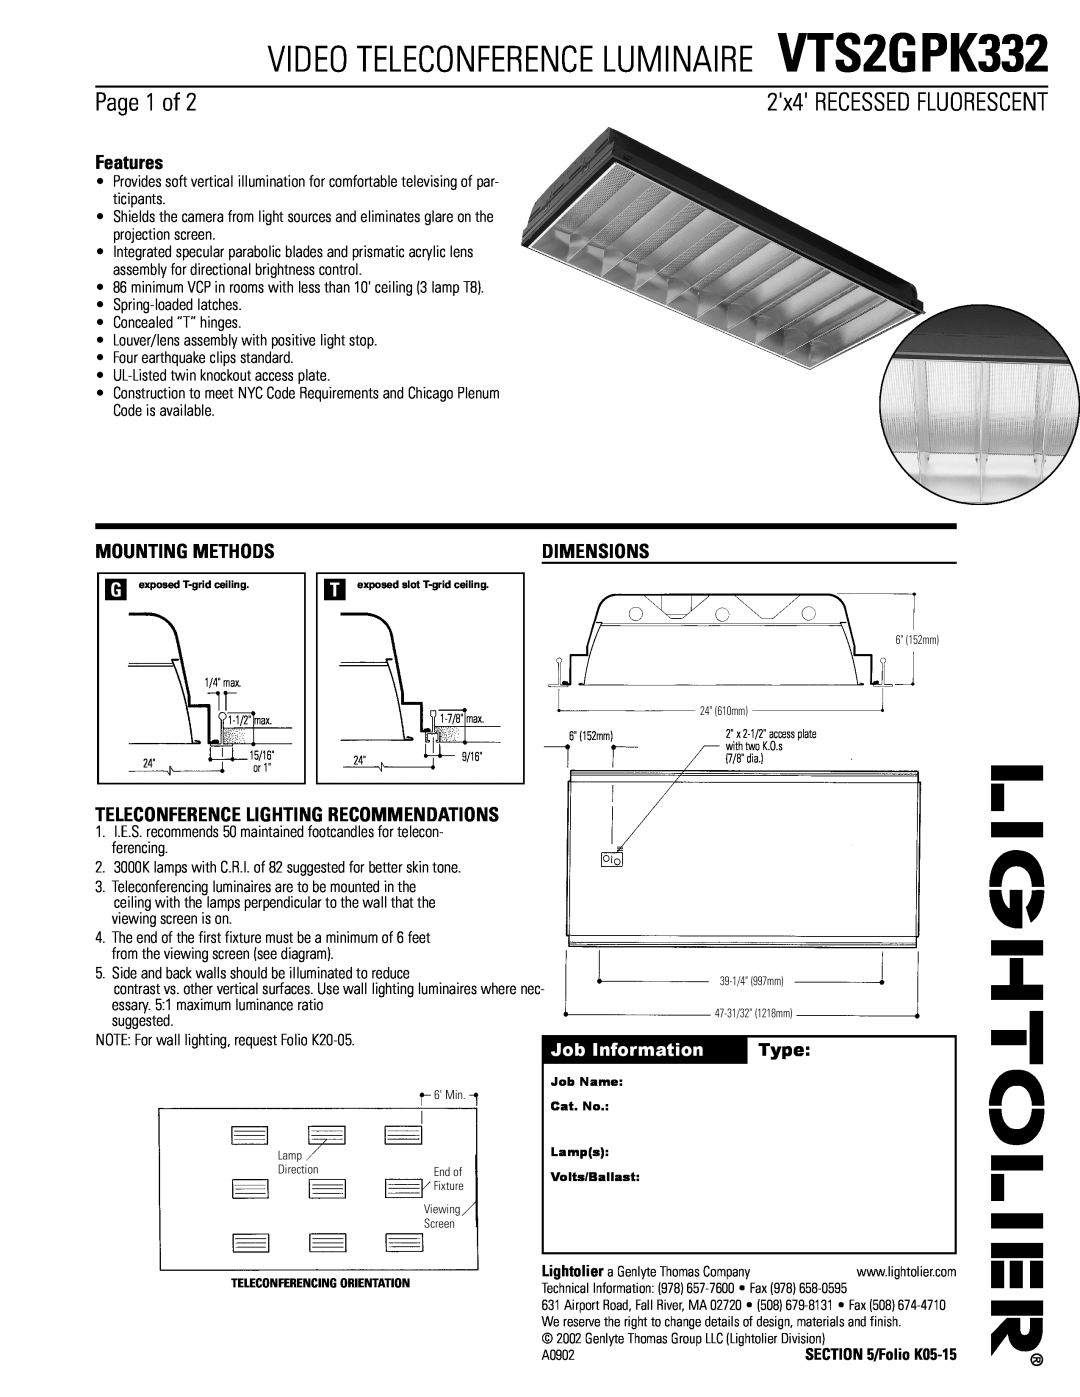 Lightolier dimensions VIDEO TELECONFERENCE LUMINAIRE VTS2GPK332, Page 1 of, Features, Mounting Methods, Dimensions 